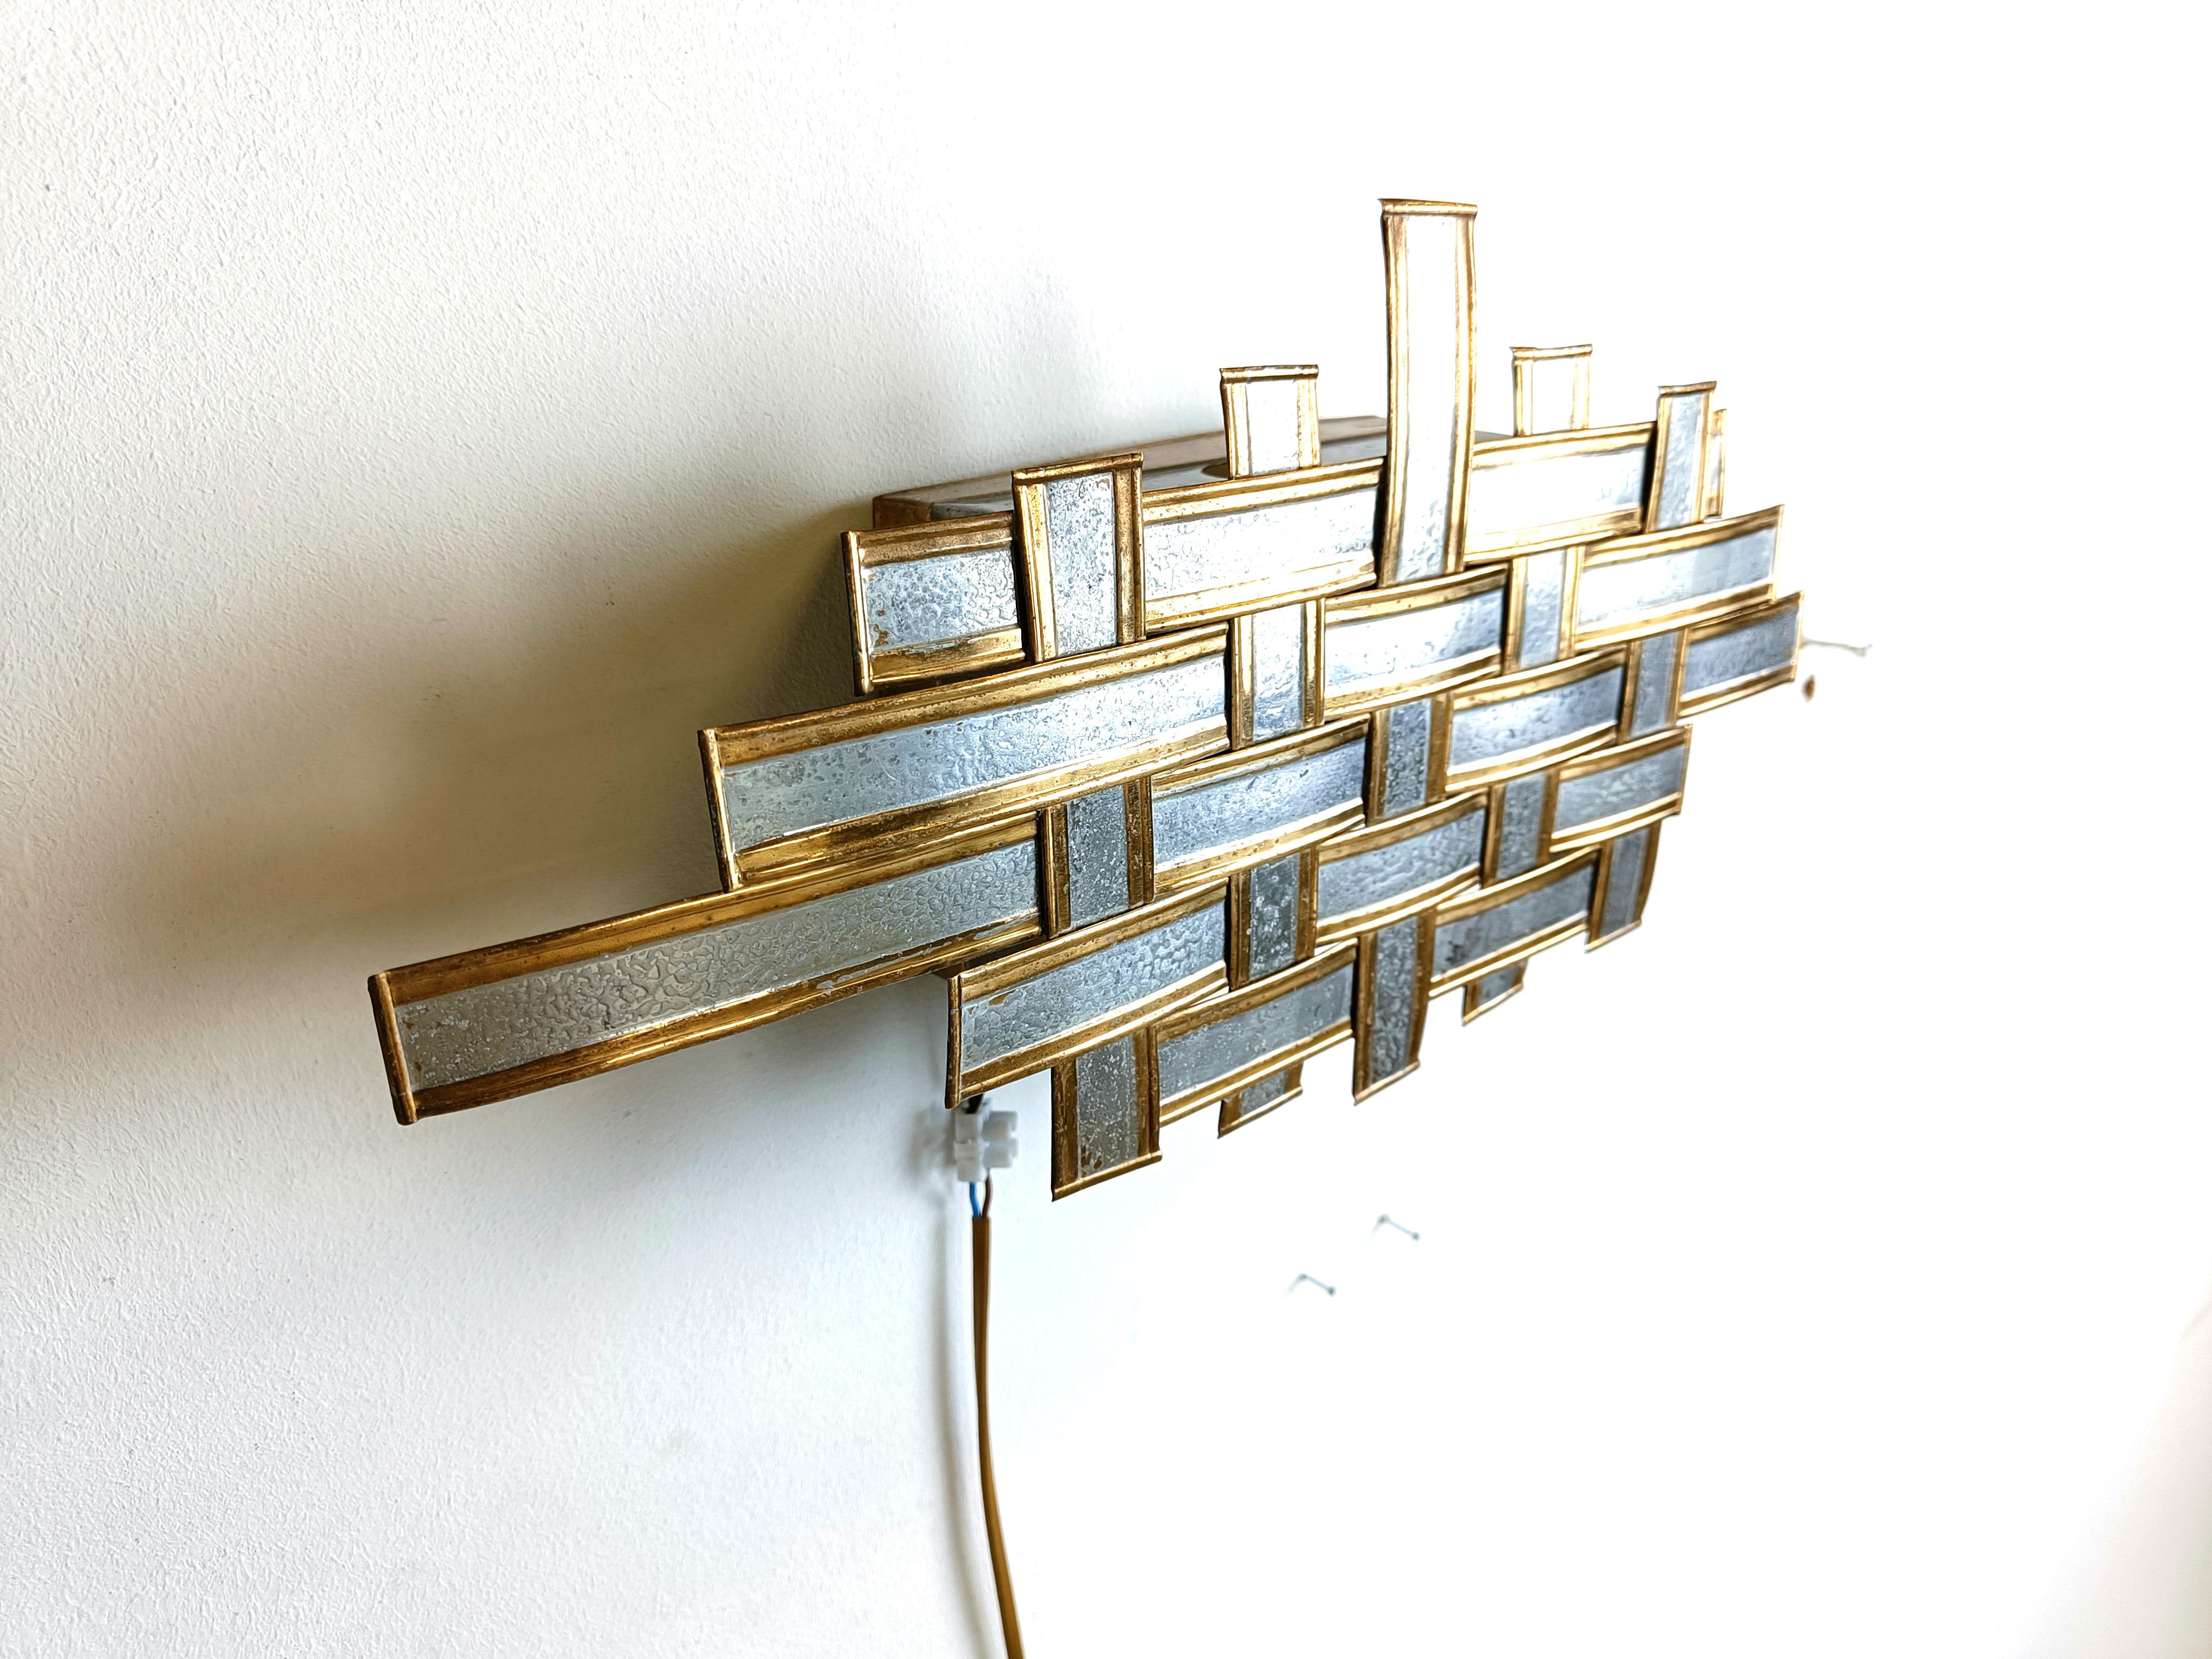 Vintage brutalist design metal wall lamp.

The lamp was made with metal strips woven into each other.

Tested and ready to use

1970s - Belgium

Dimensions:
Height: 20cm
Width: 40cm
Depth: 10cm

Ref.: 210155